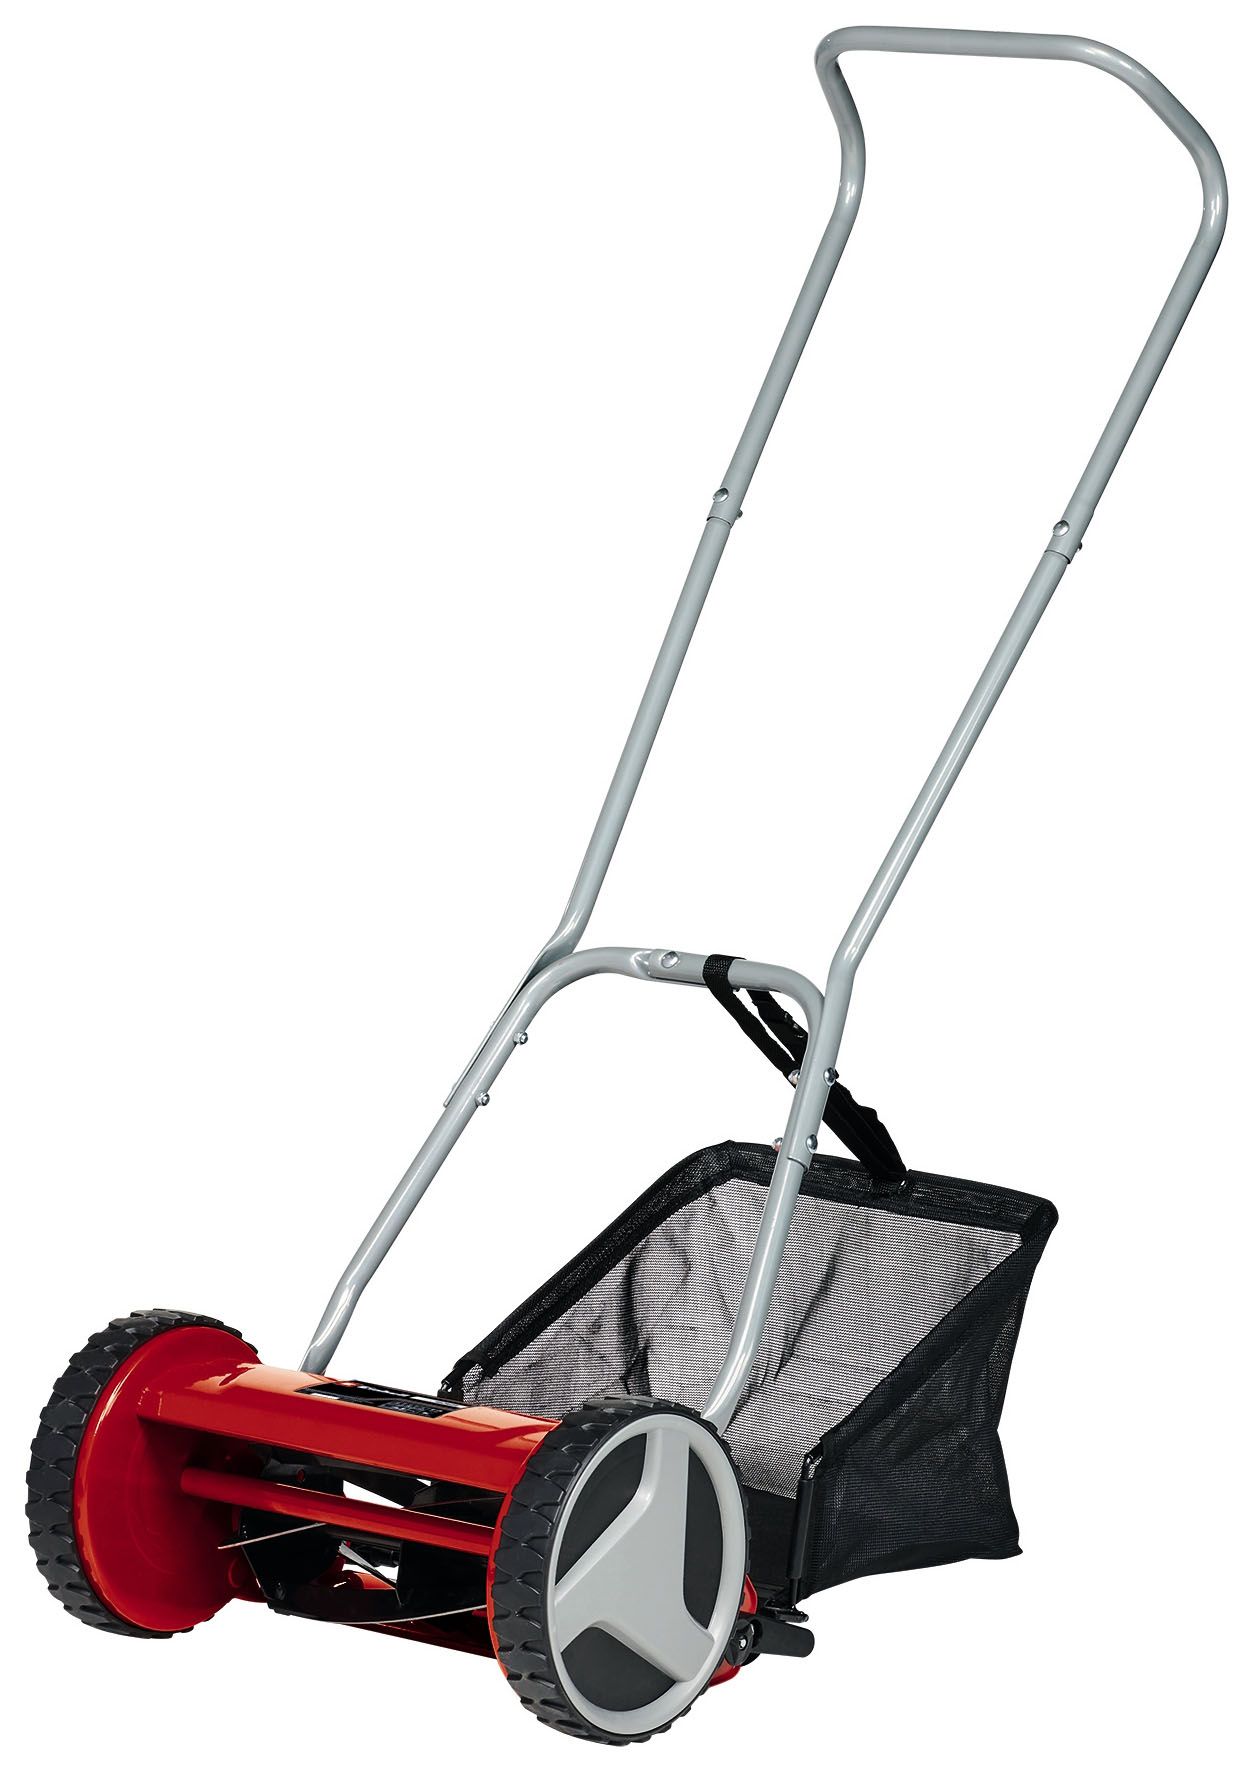 Image of Einhell Classic GC-HM 300 Hand Push Lawn Mower